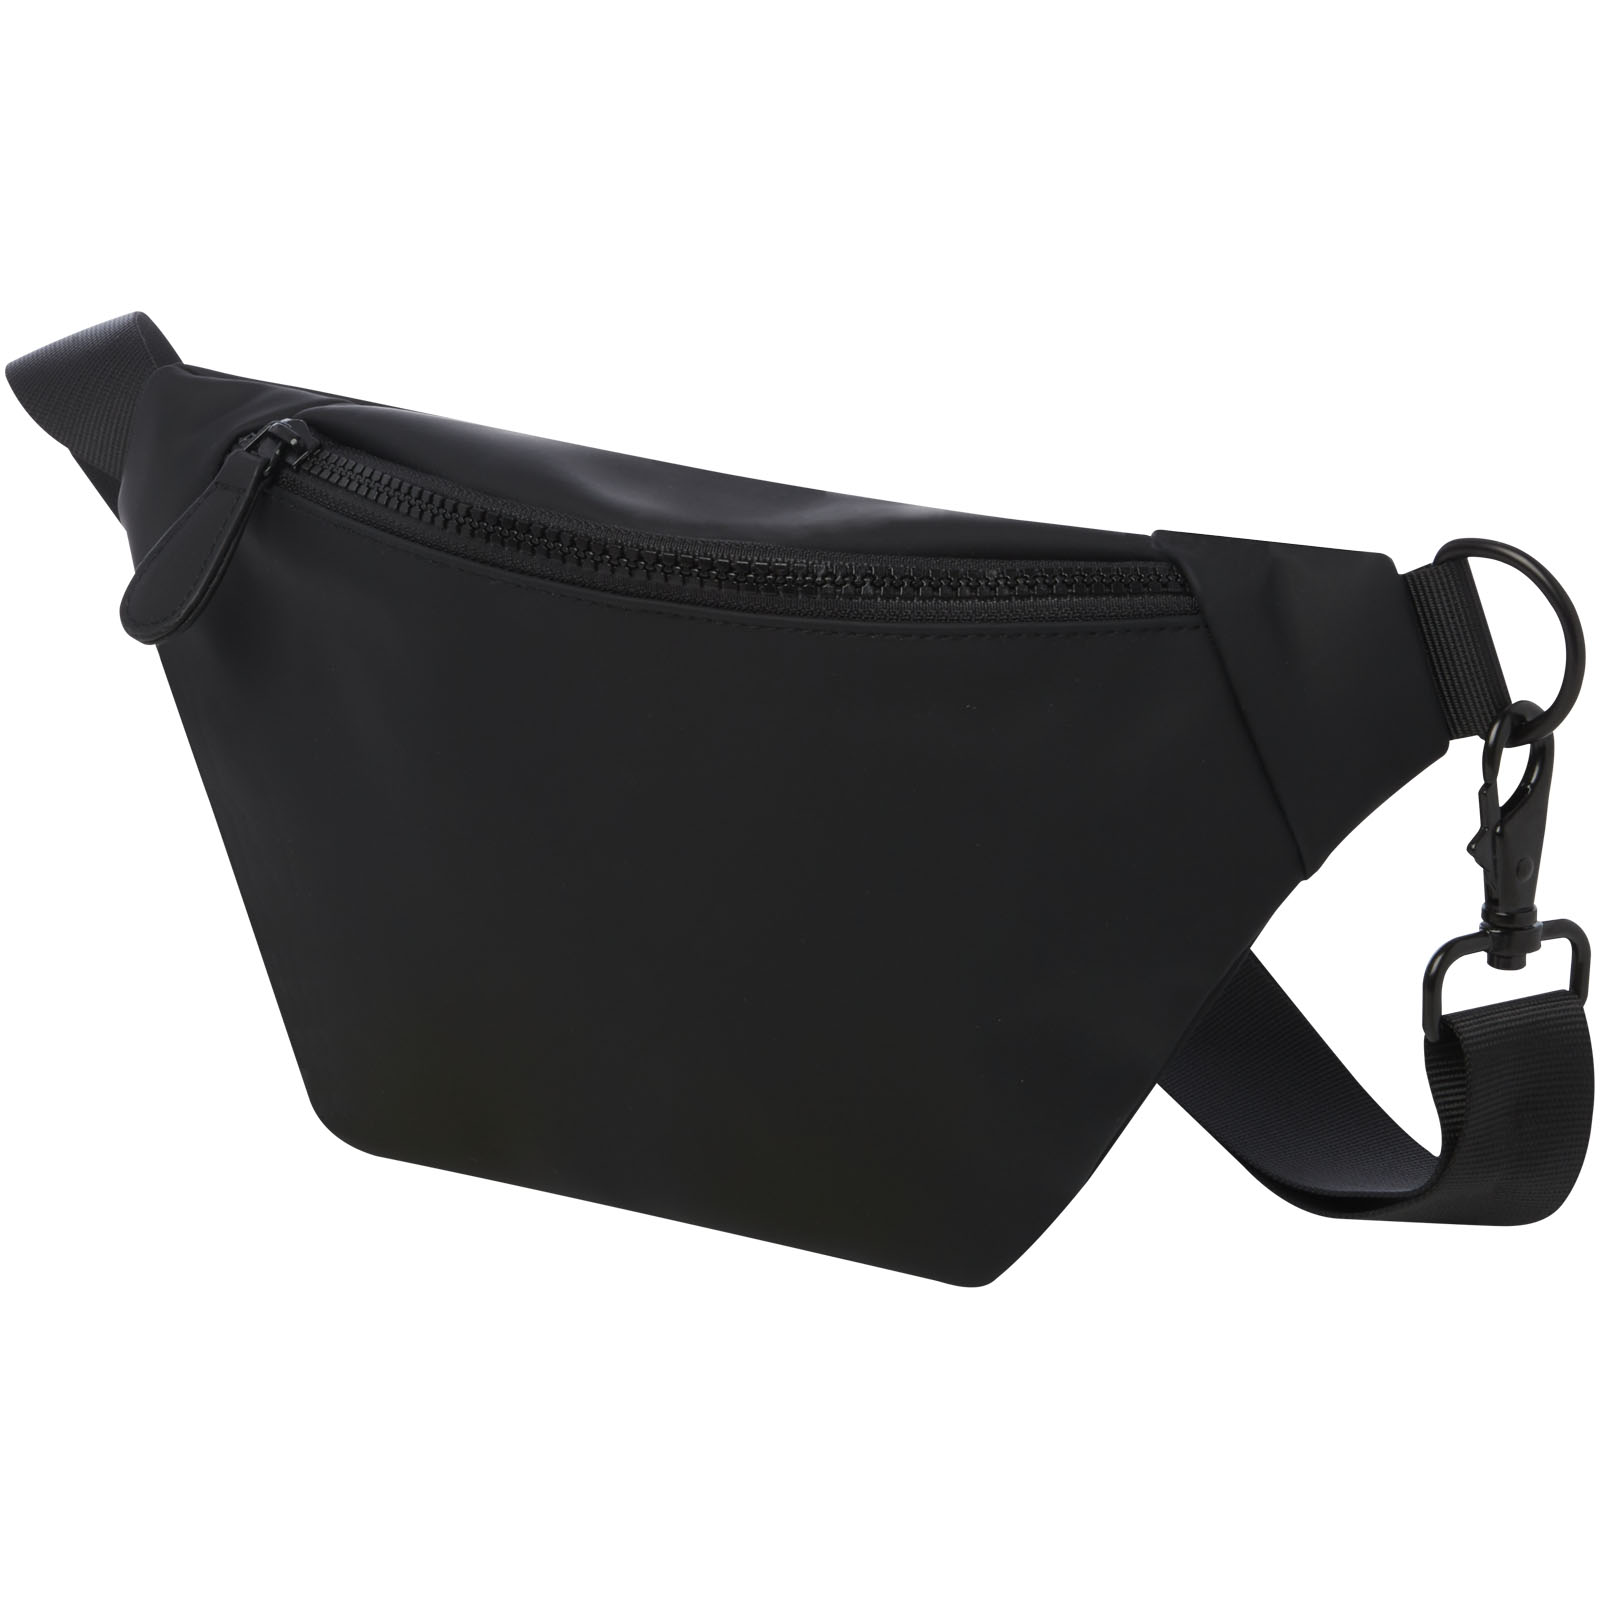 Advertising Travel Accessories - Turner fanny pack - 0